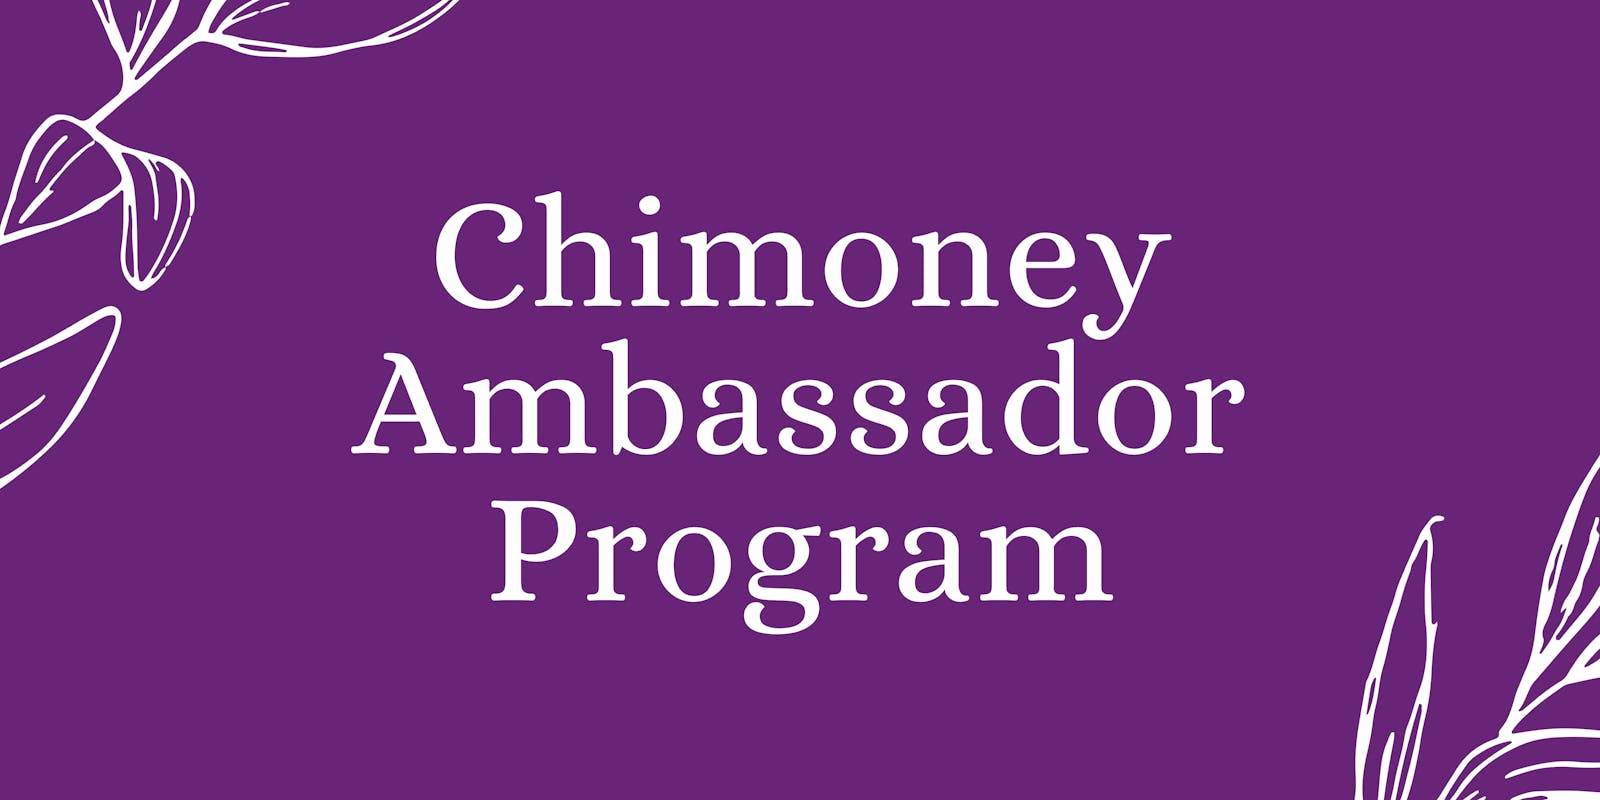 Chimoney Ambassador Program: A Year of Growth, Connection, and Impact